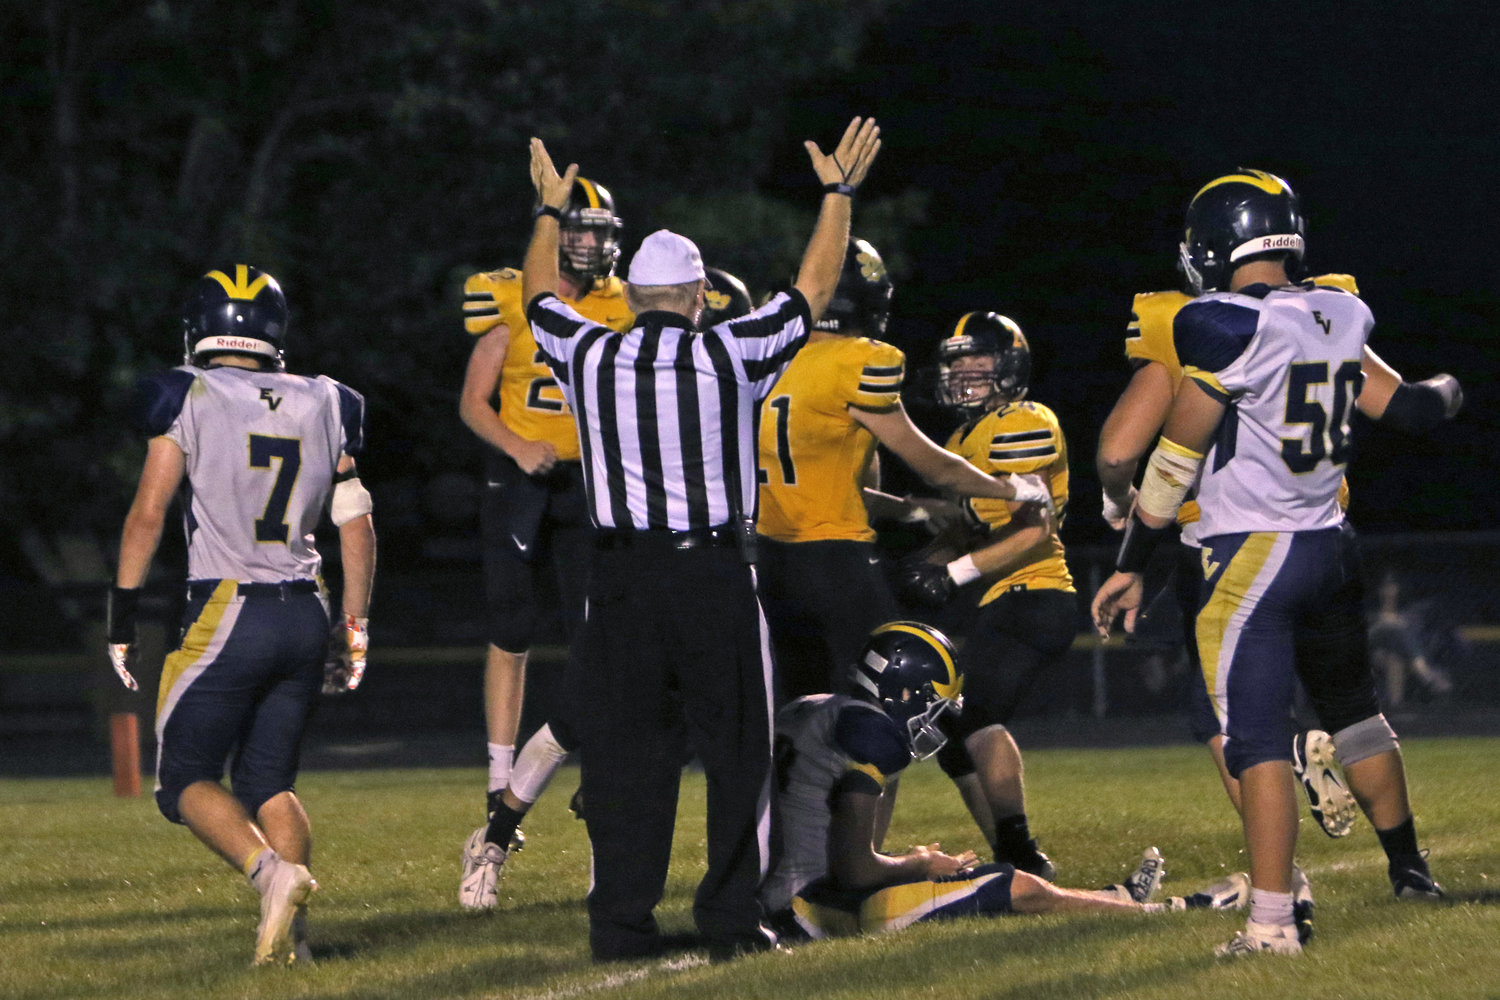 The Lions celebrate Joe Boxwell's fumble recovery for a touchdown during Lone Tree's 49-24 win over English Valleys.